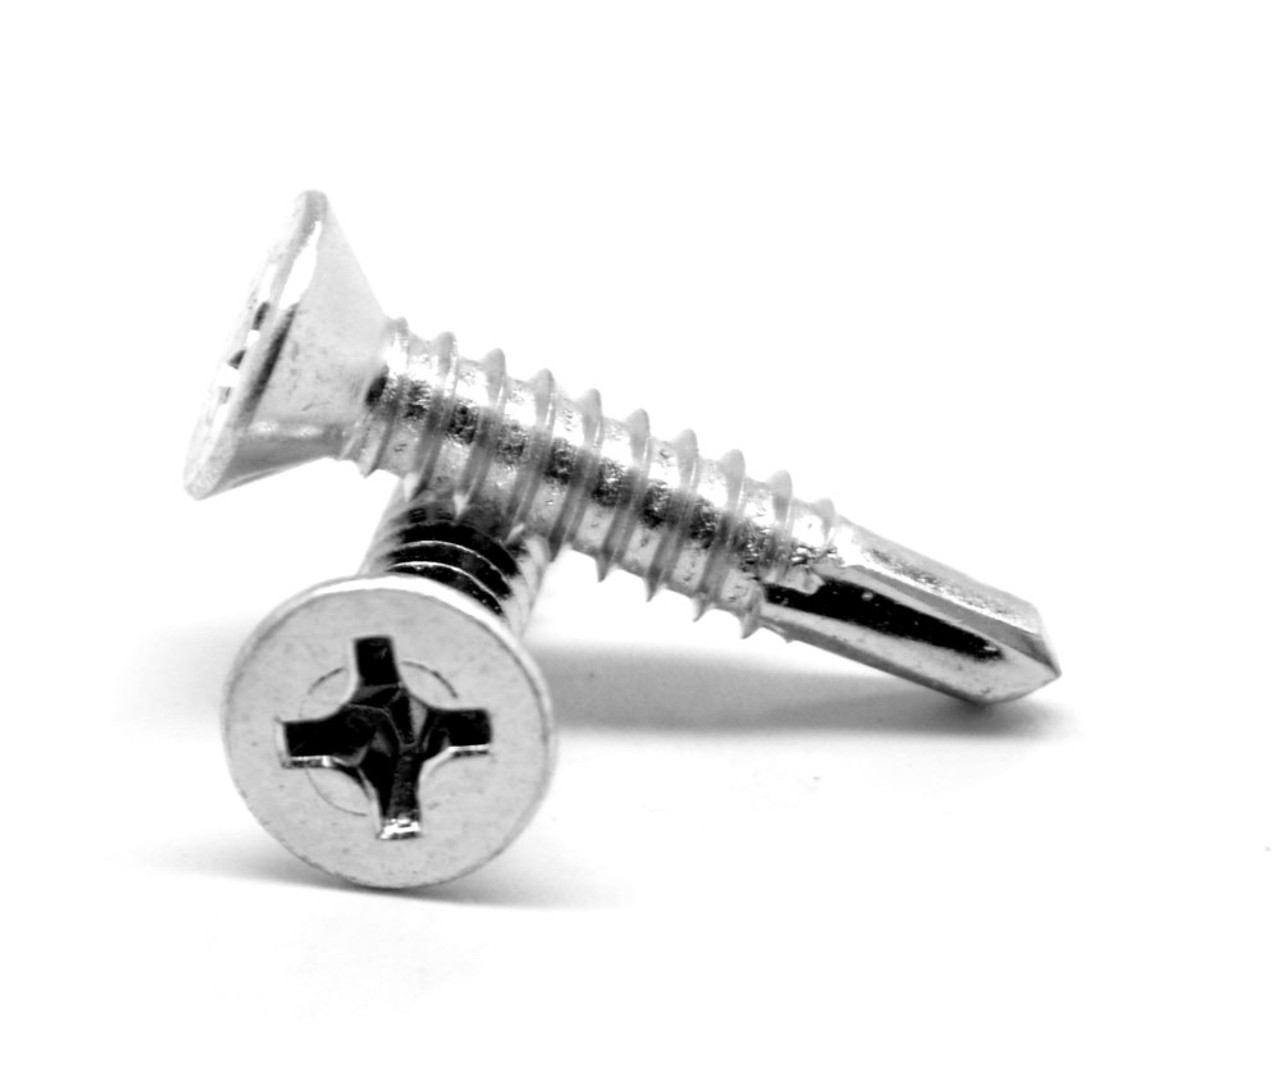 #7-19 x 1/2" (FT) Self Drilling Screw Phillips Flat Head #2 Point Low Carbon Steel Zinc Plated